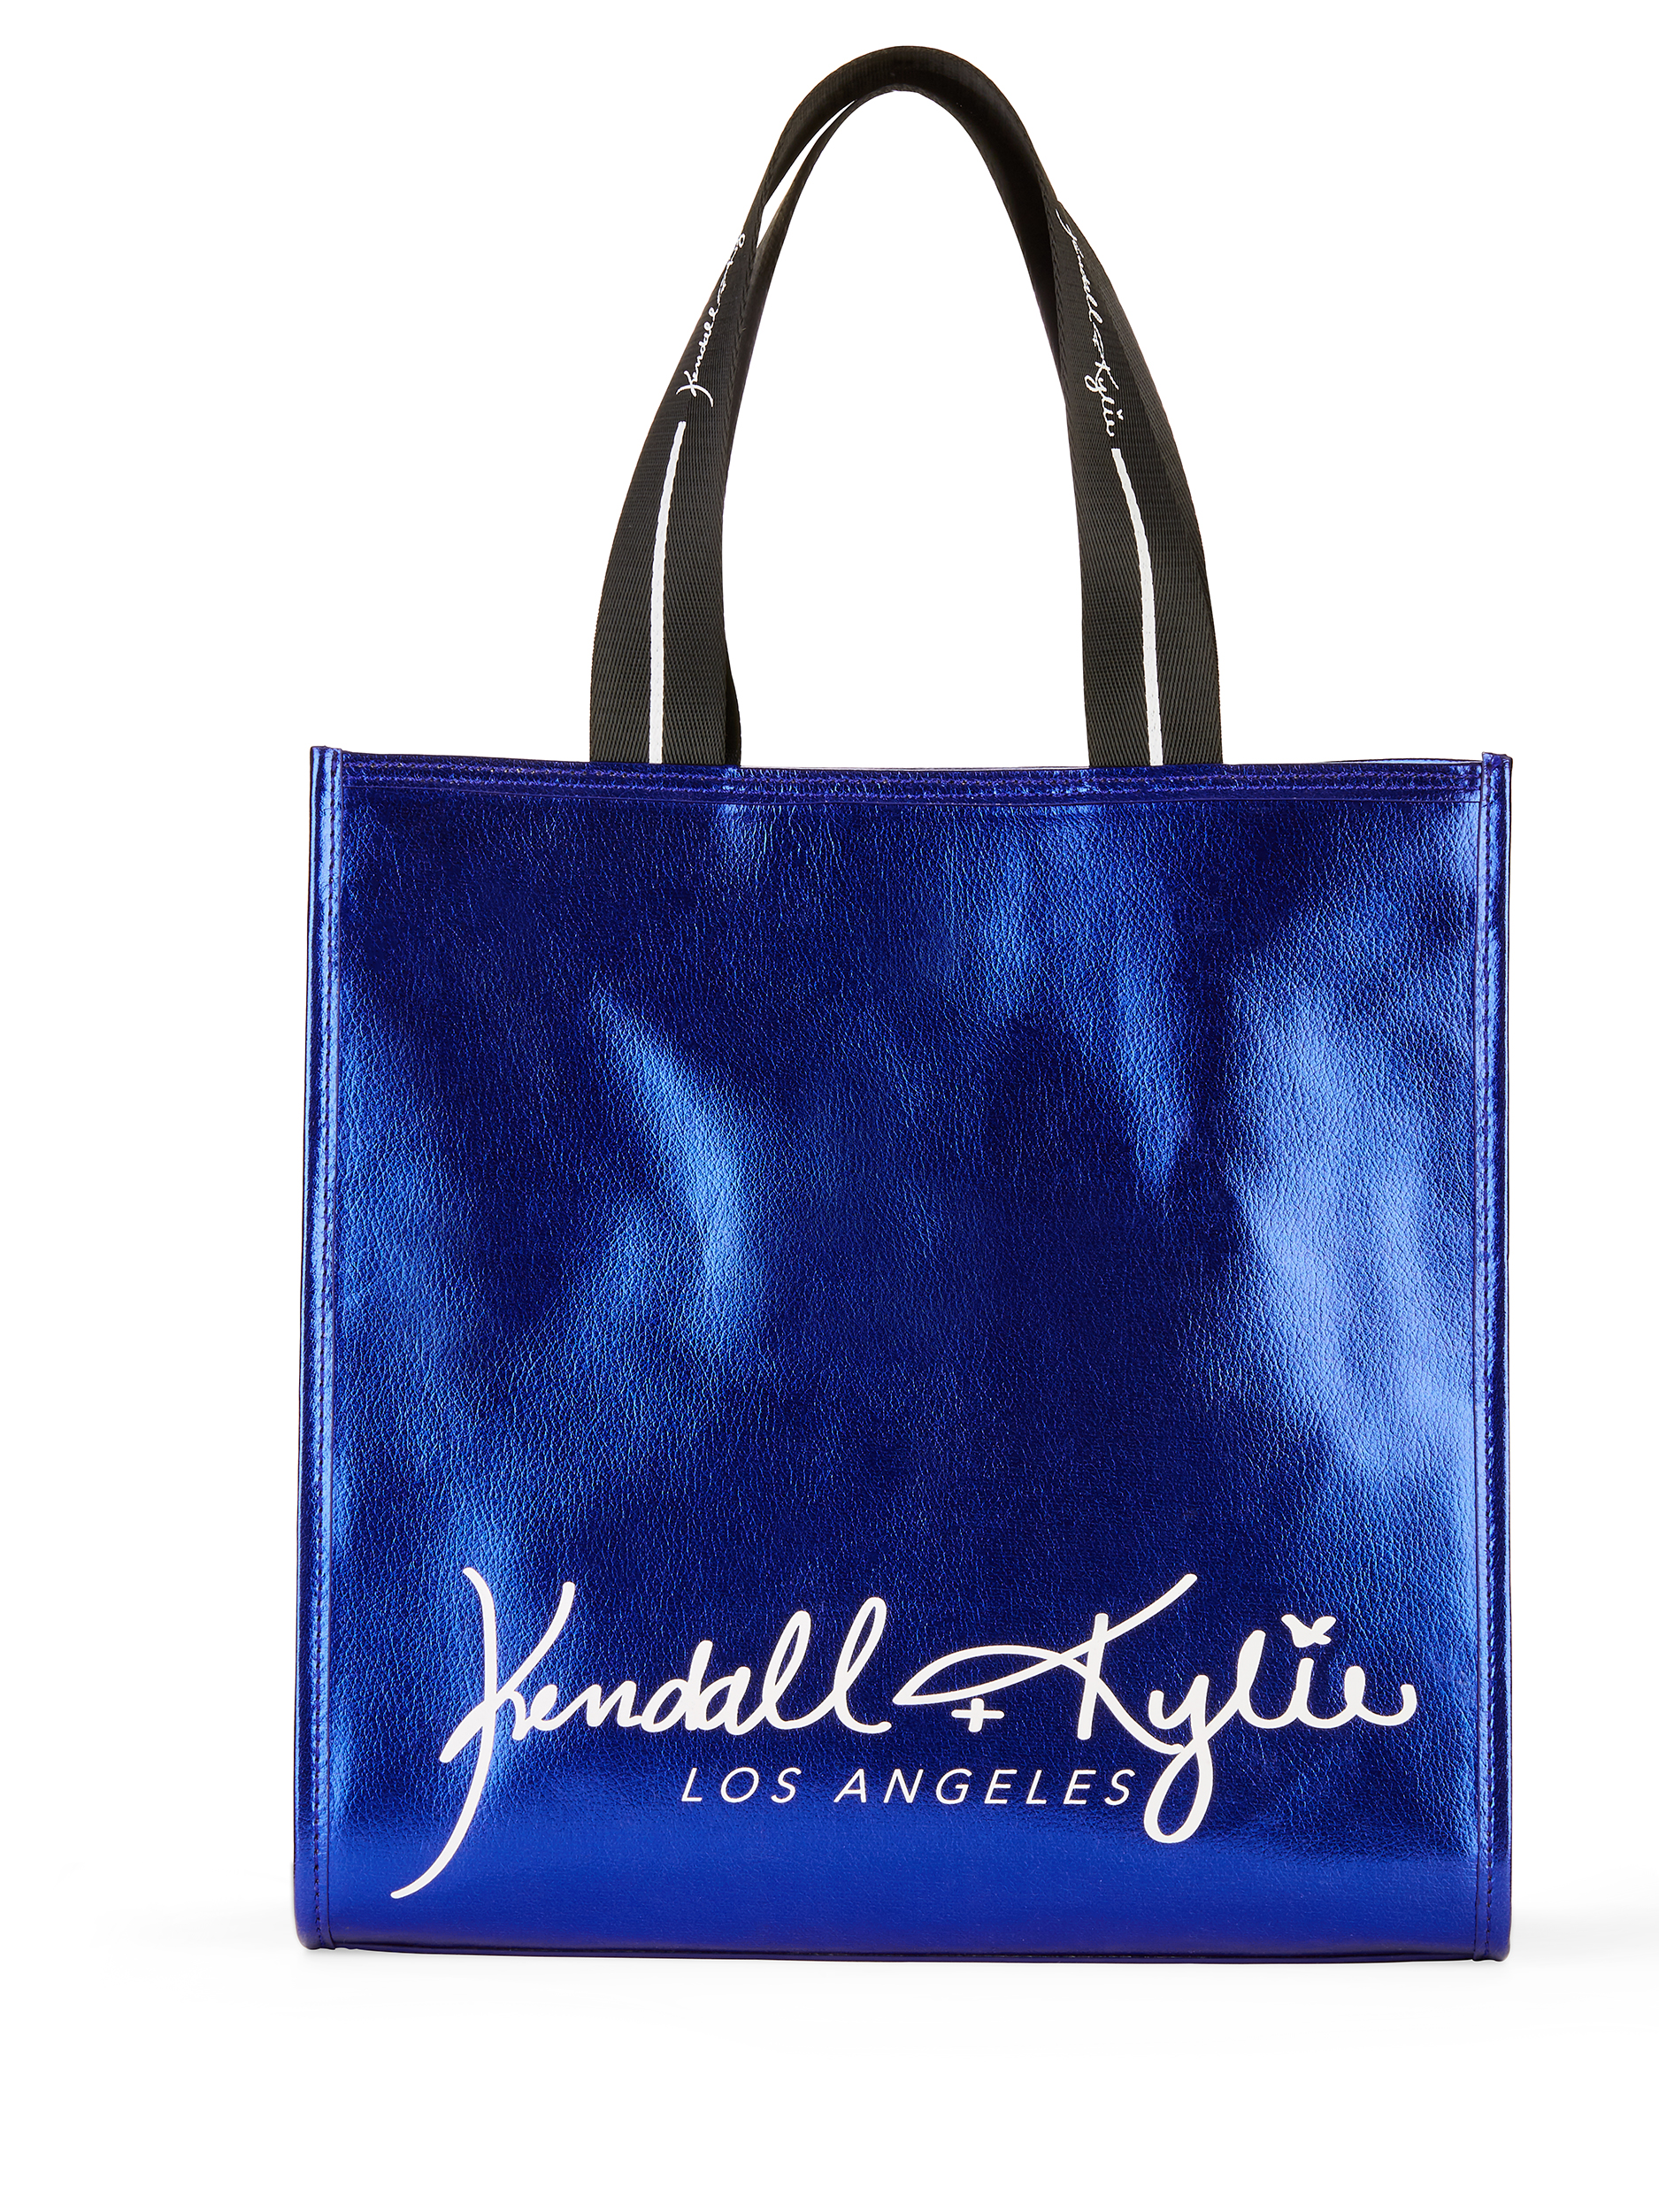 Kendall + Kylie for Walmart Cobalt Tote - image 1 of 5